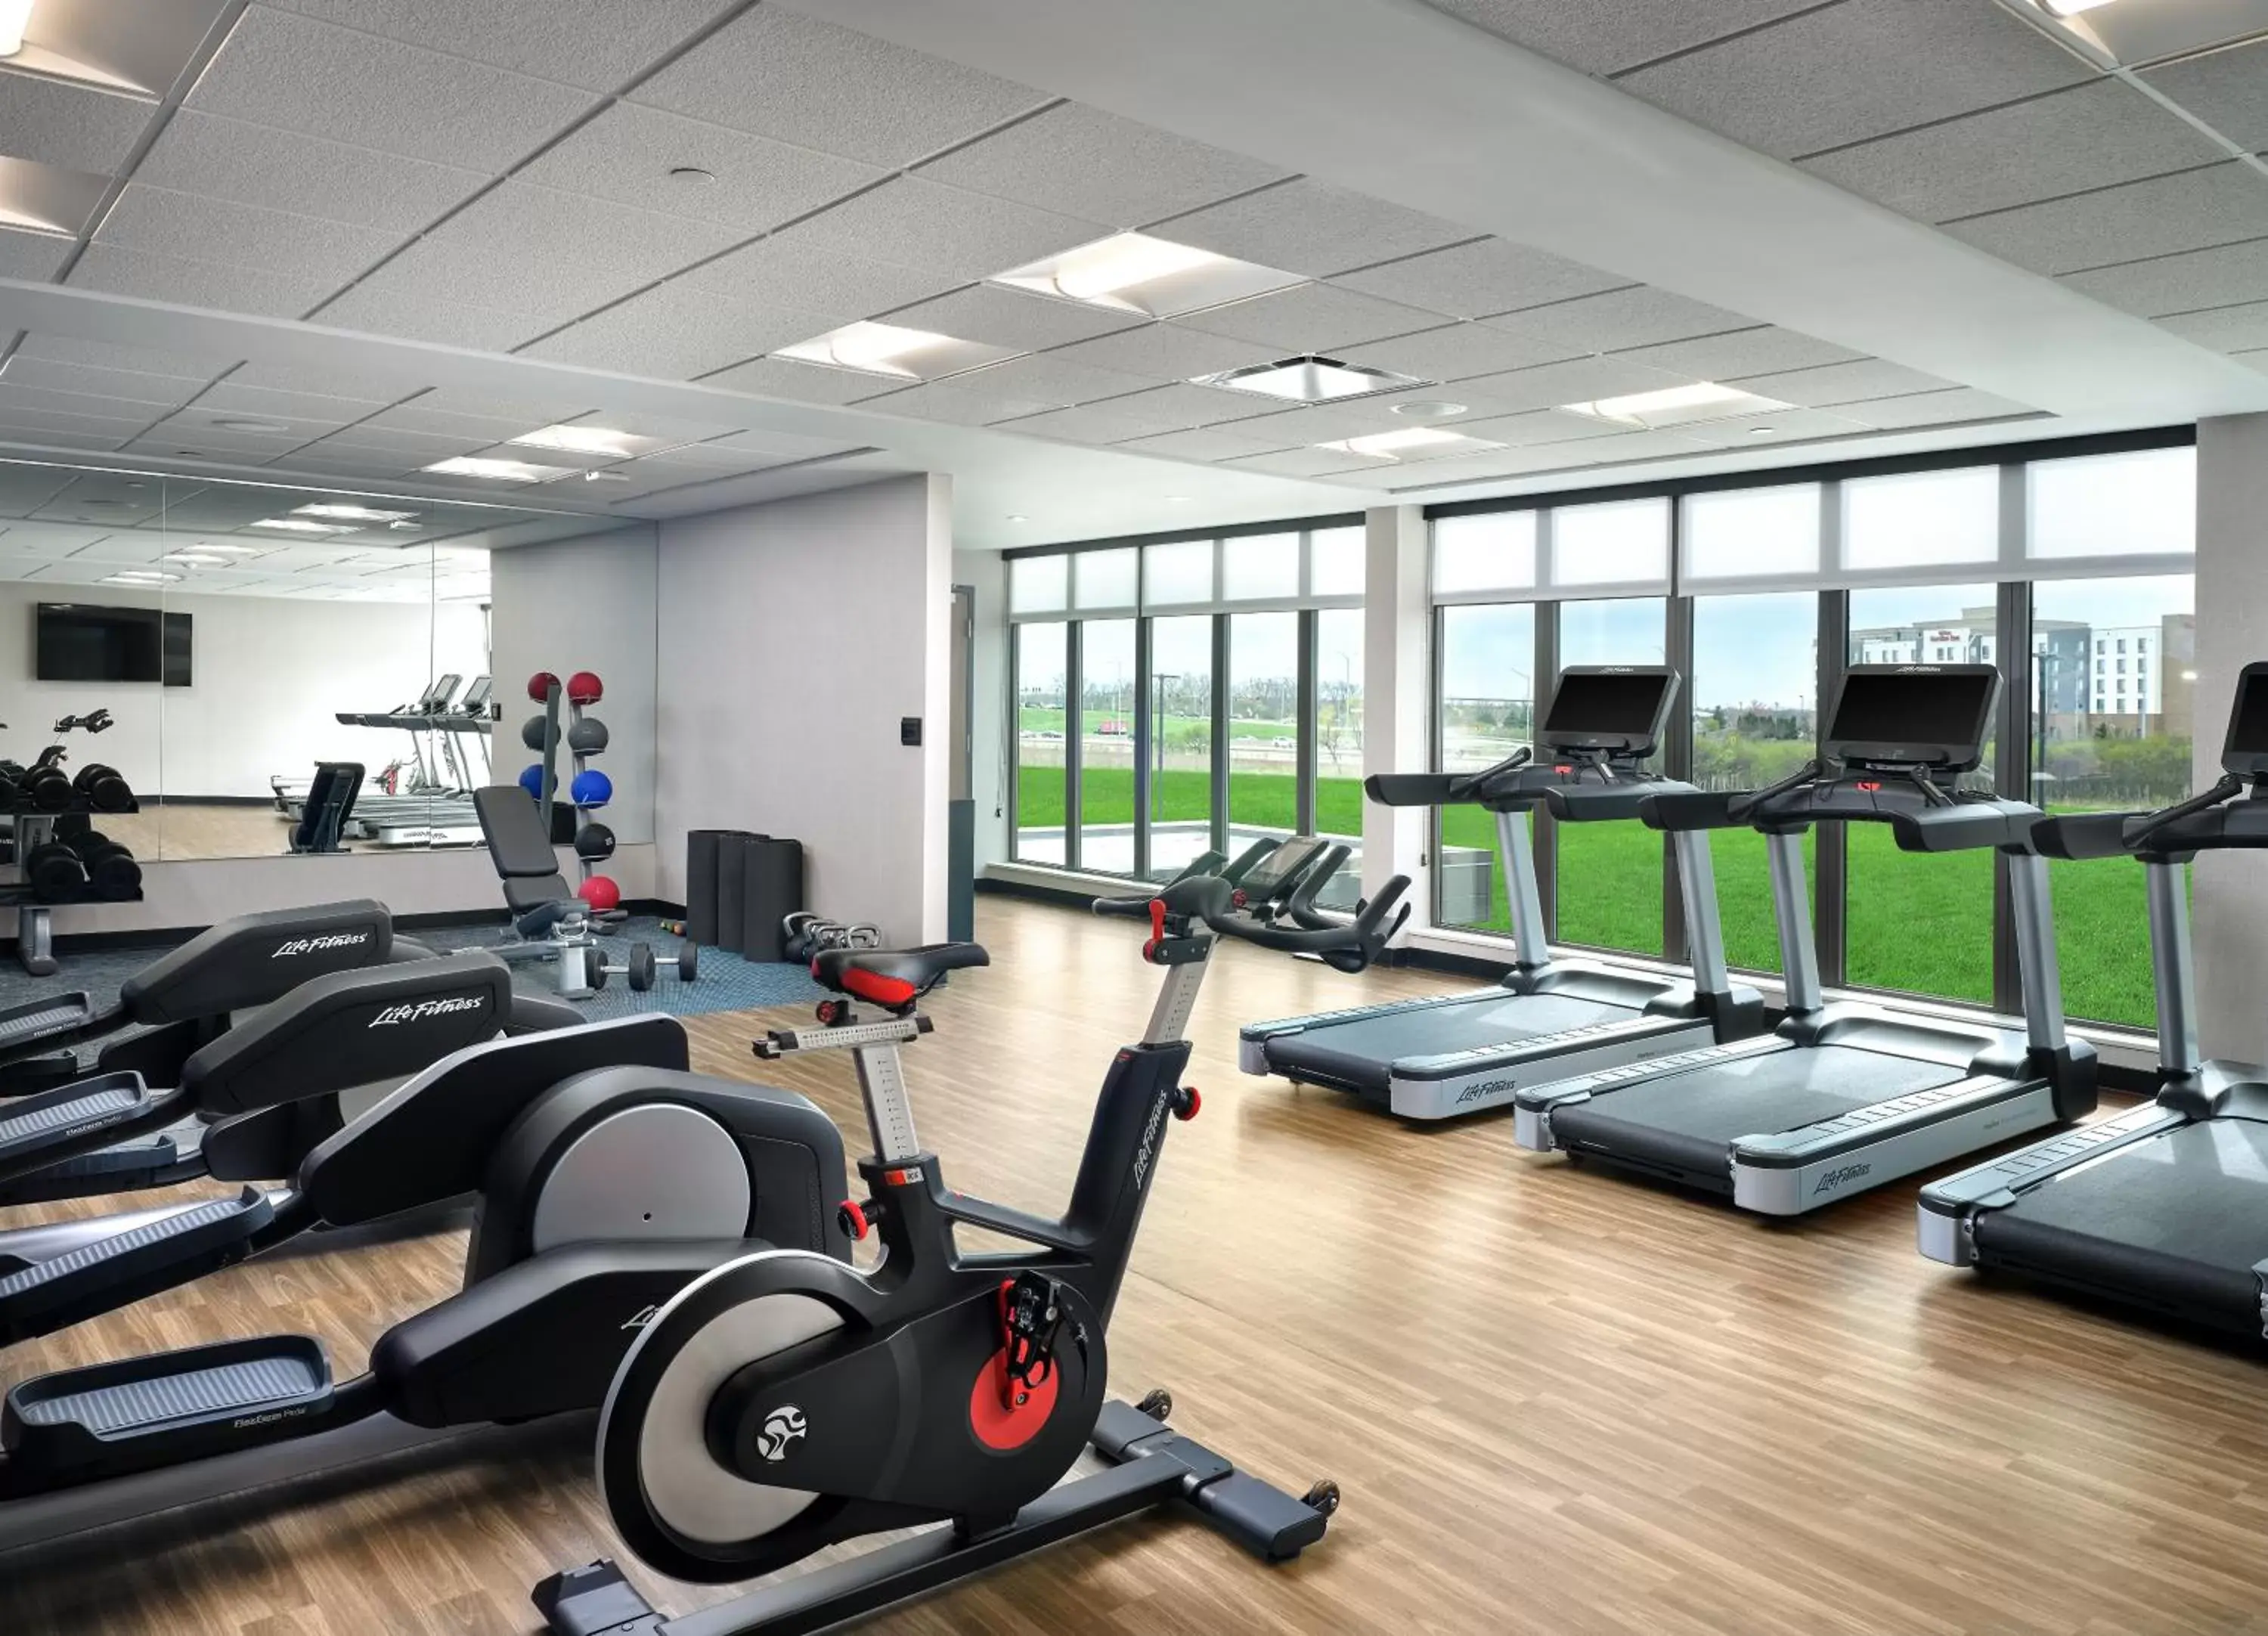 Fitness centre/facilities, Fitness Center/Facilities in The Forester, a Hyatt Place Hotel